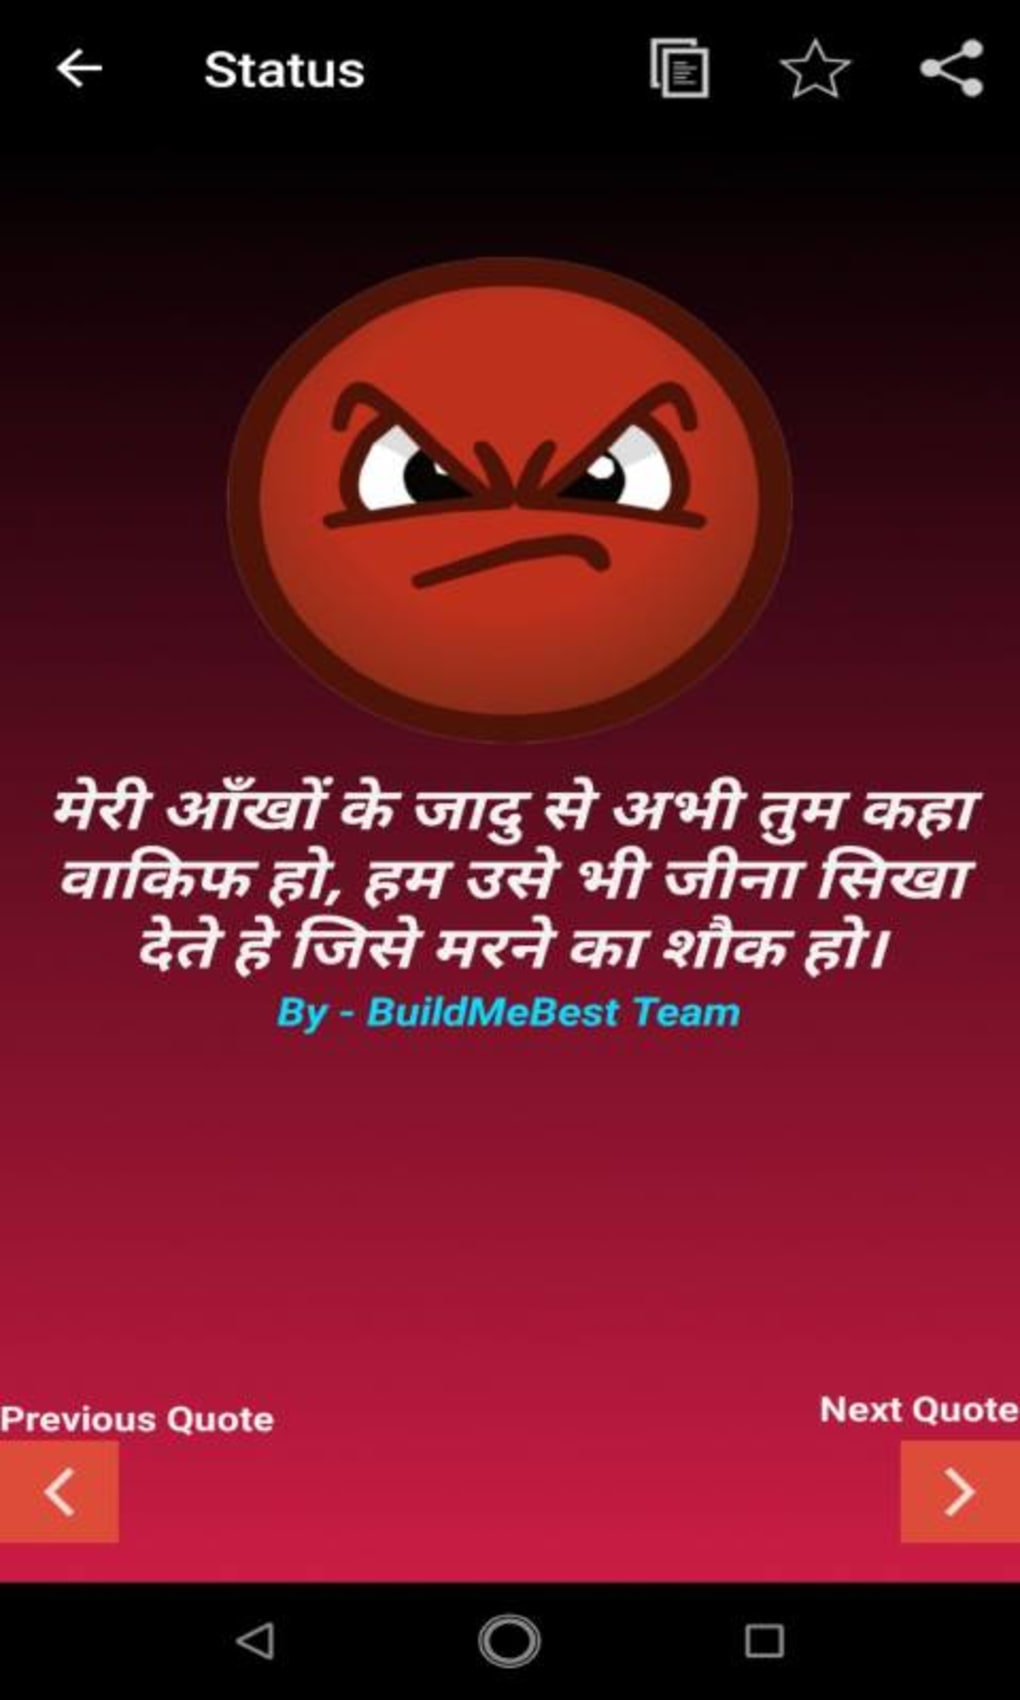 Angry Quotes - Sad Mood Status Quotation, Thoughts APK for Android ...